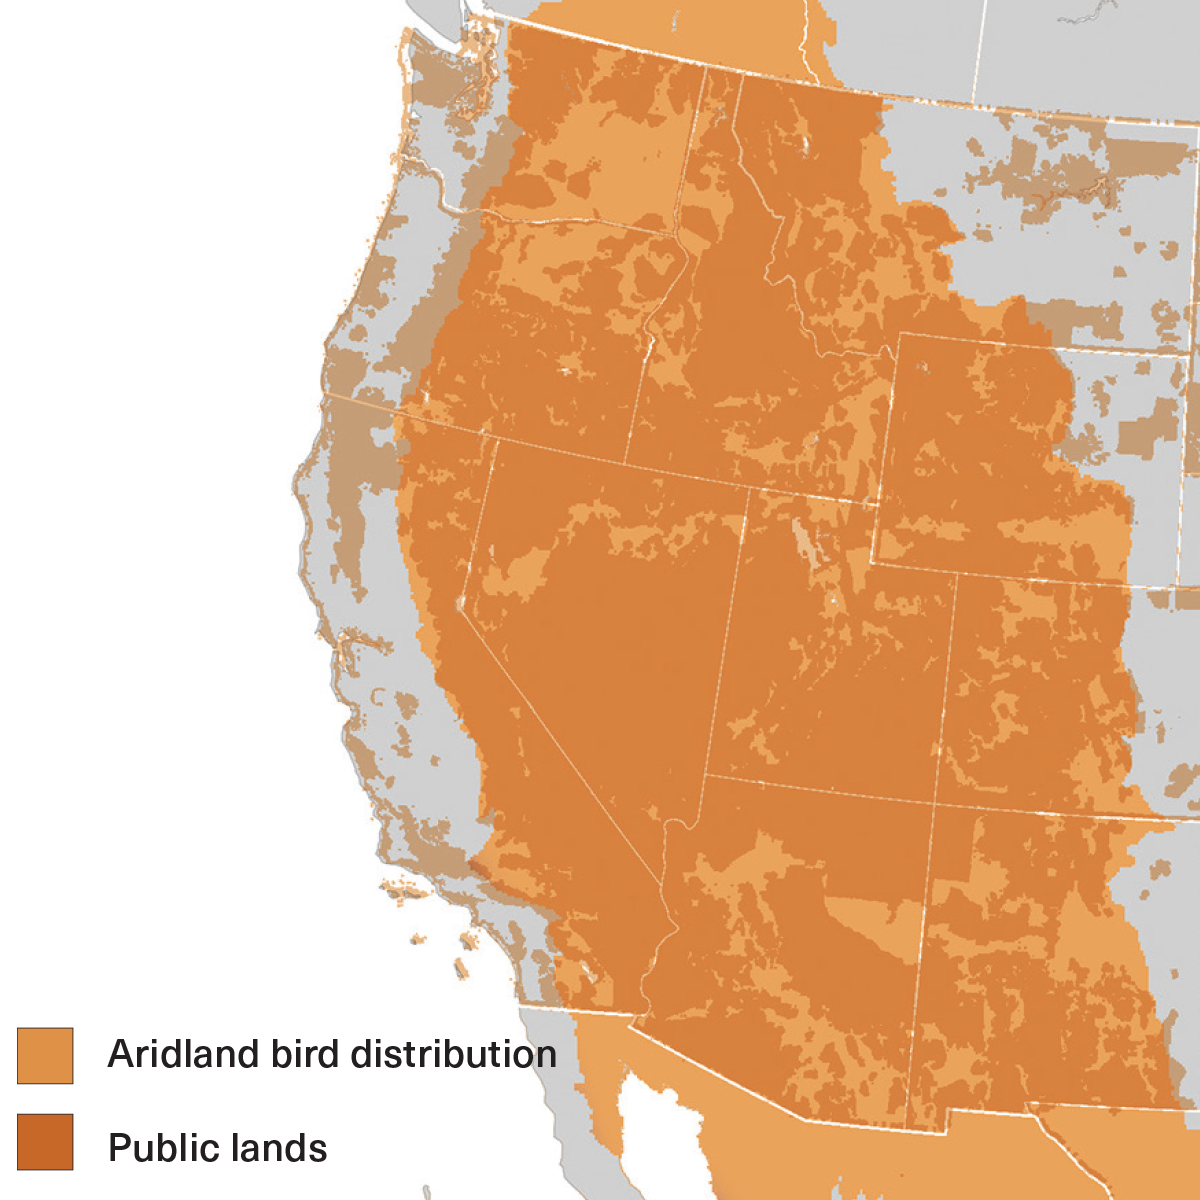 map of western United States showing overlap of aridlands and public lands